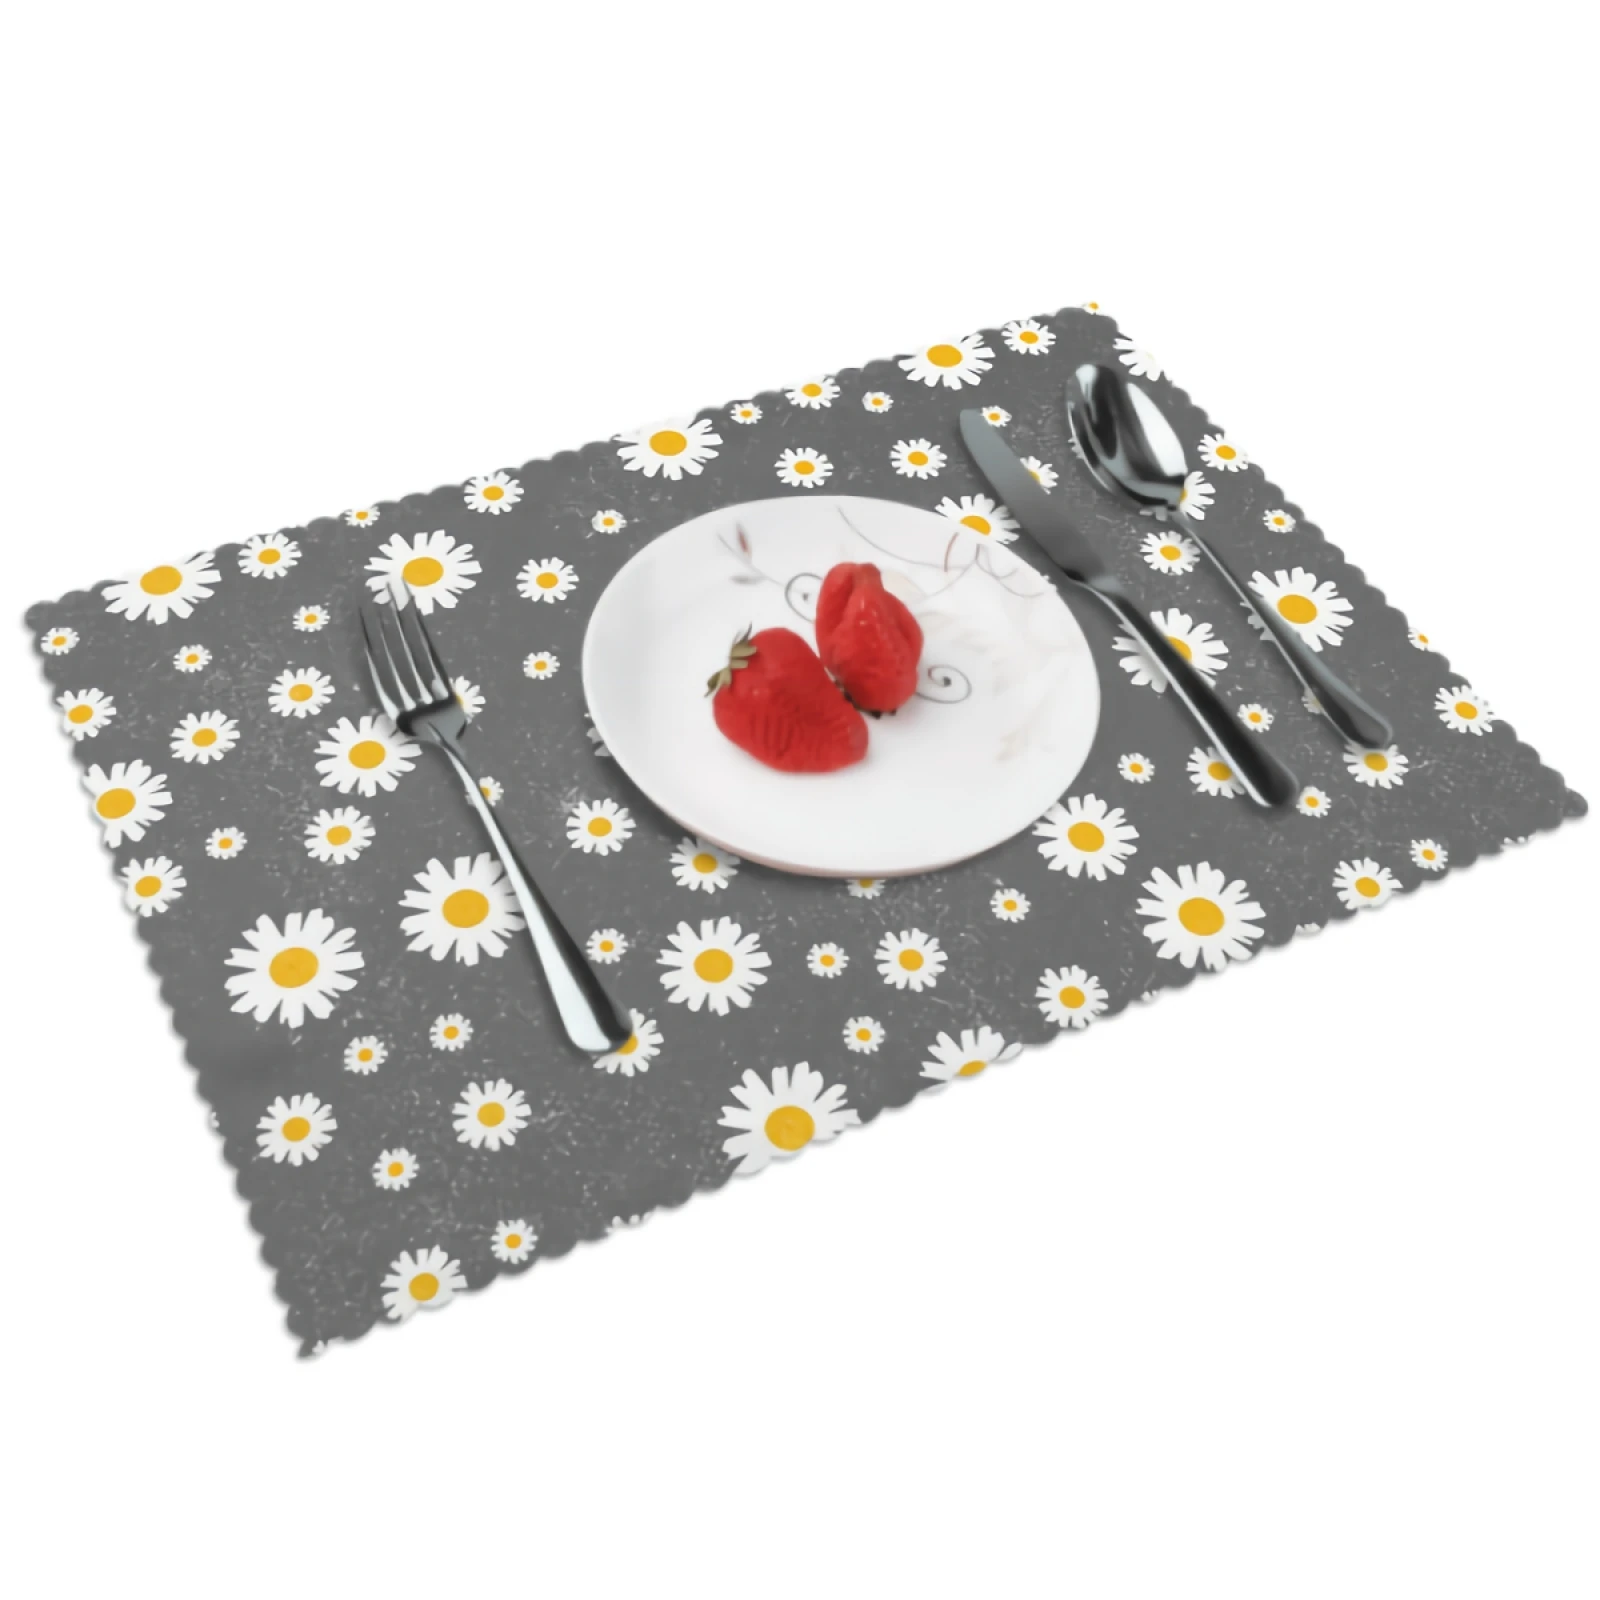 

Cute Daisy Placemats Spring Summer Small Flower Placemat Set of 4 Heat-Resisting Non Slip Table Mats Polyeste Place Mats for